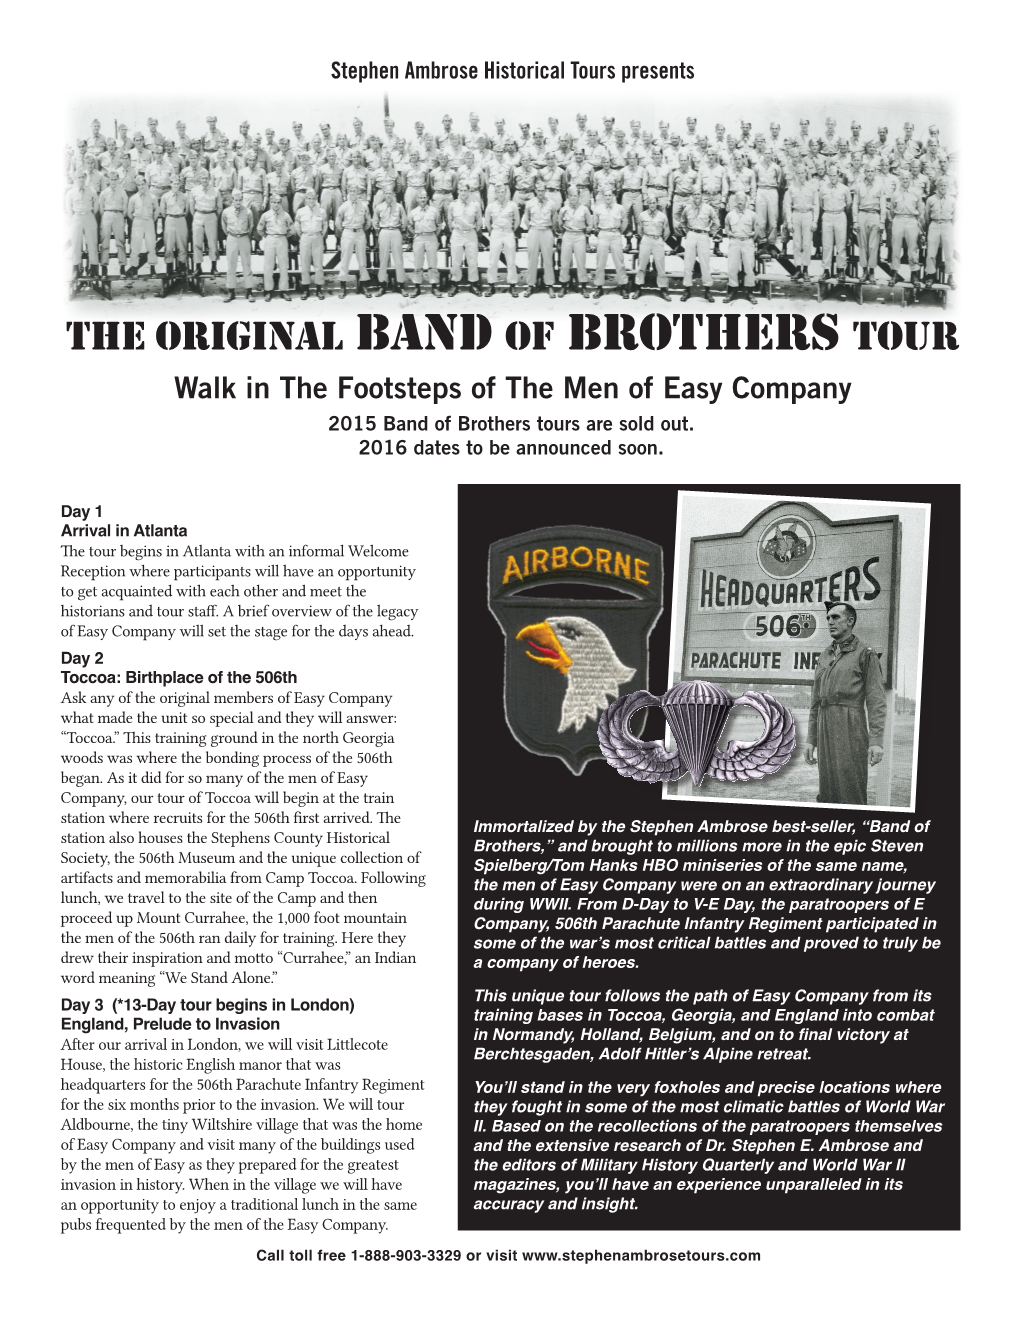 The Original Band of Brothers Tour Walk in the Footsteps of the Men of Easy Company 2015 Band of Brothers Tours Are Sold Out